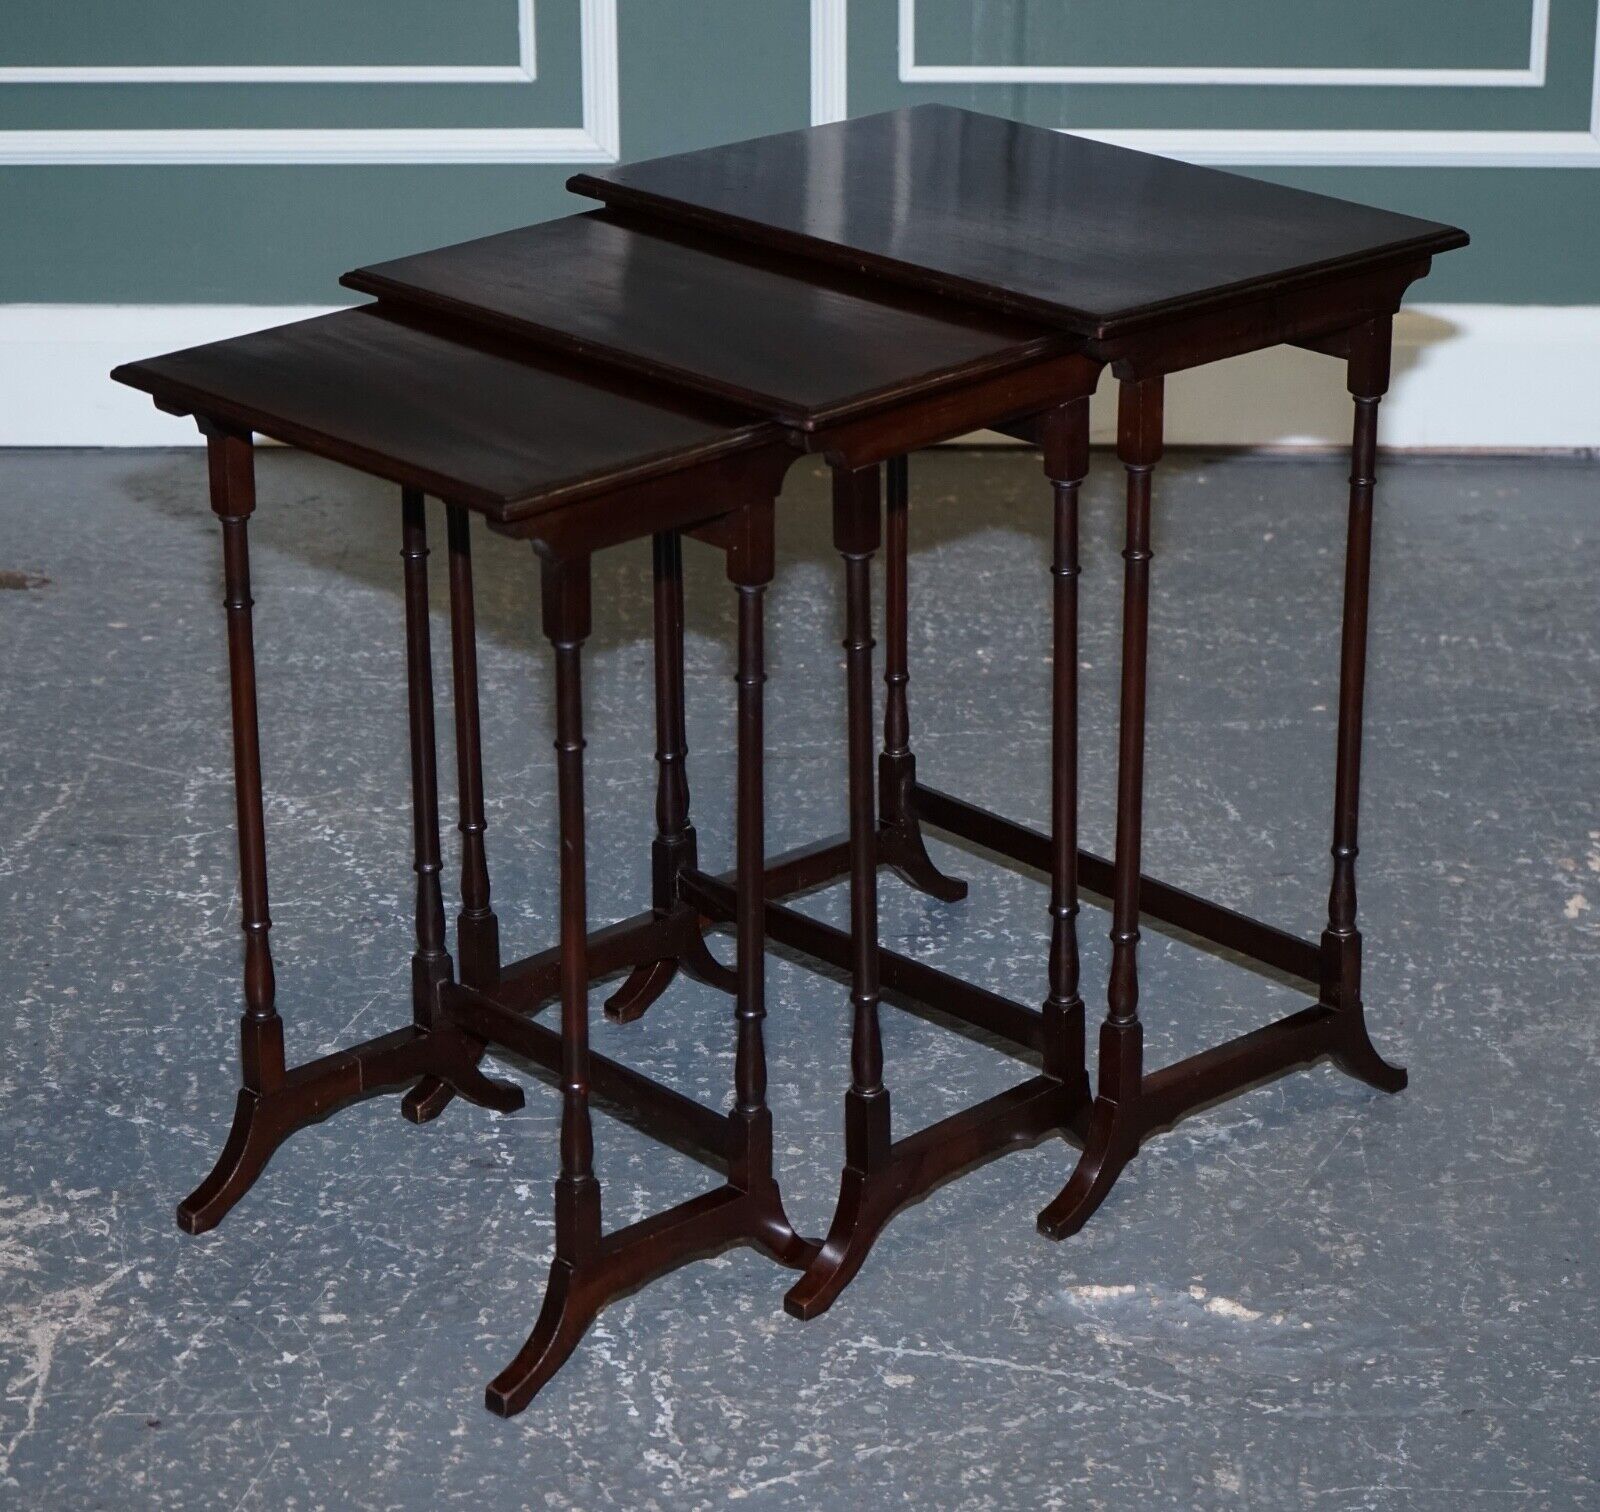 VICTORIAN NEST OF THREE NESTING TABLES SIDE TABLES WITH BAMBOO LEGS